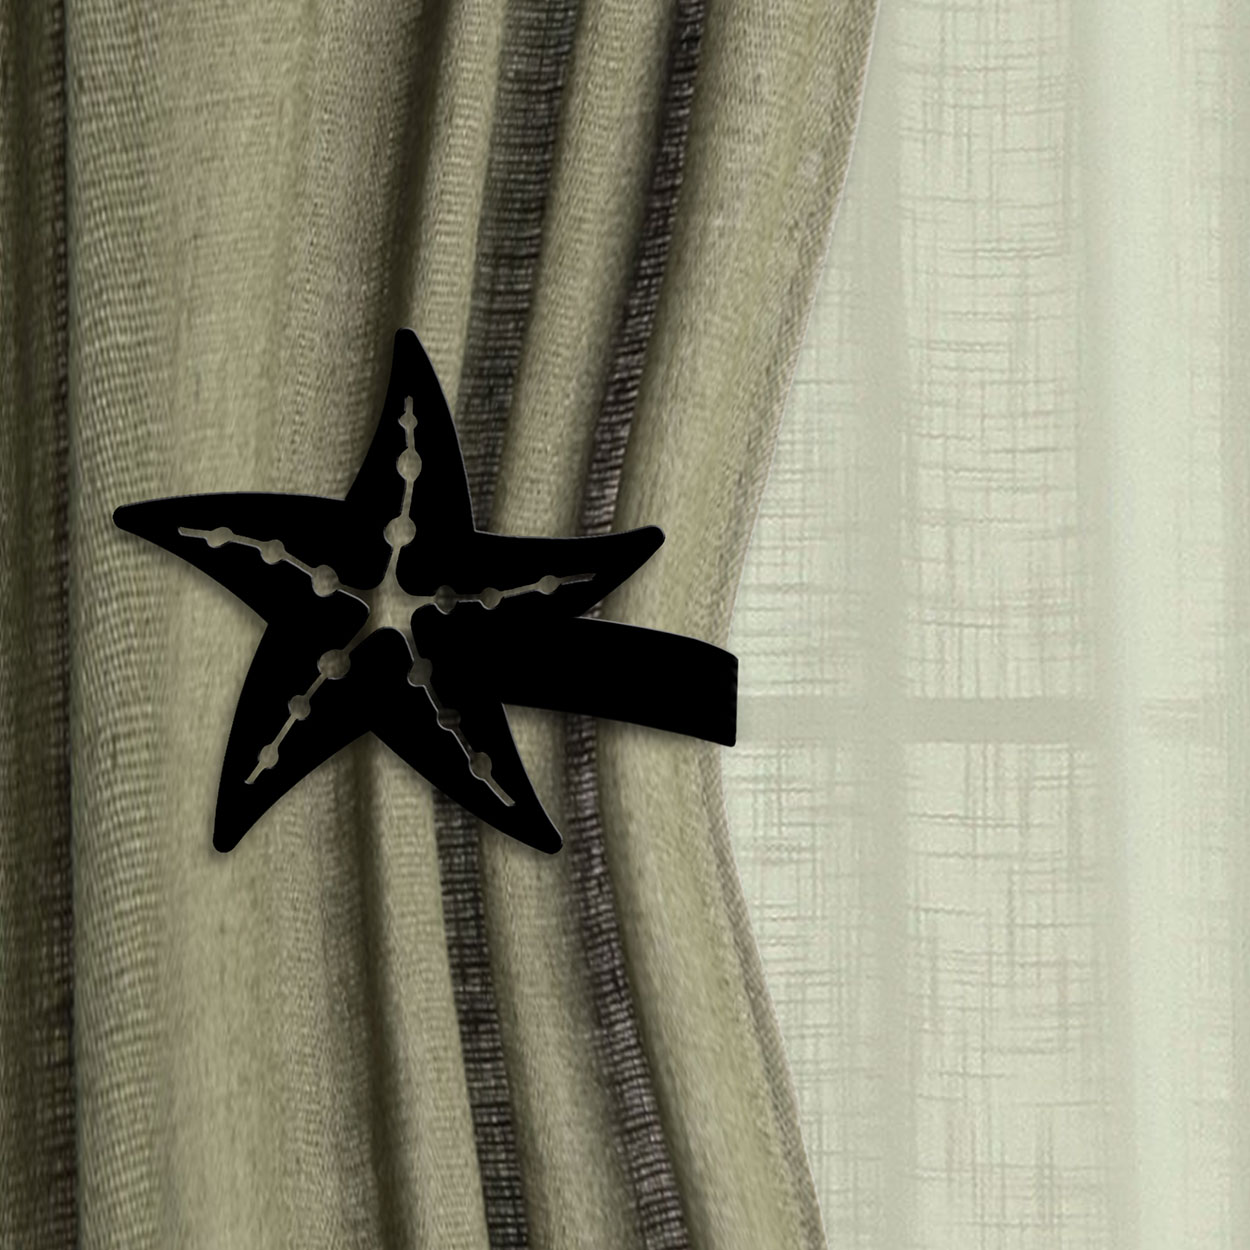 614532 - Drapery Tie Back Hook - Starfish - Choose L or R and Color